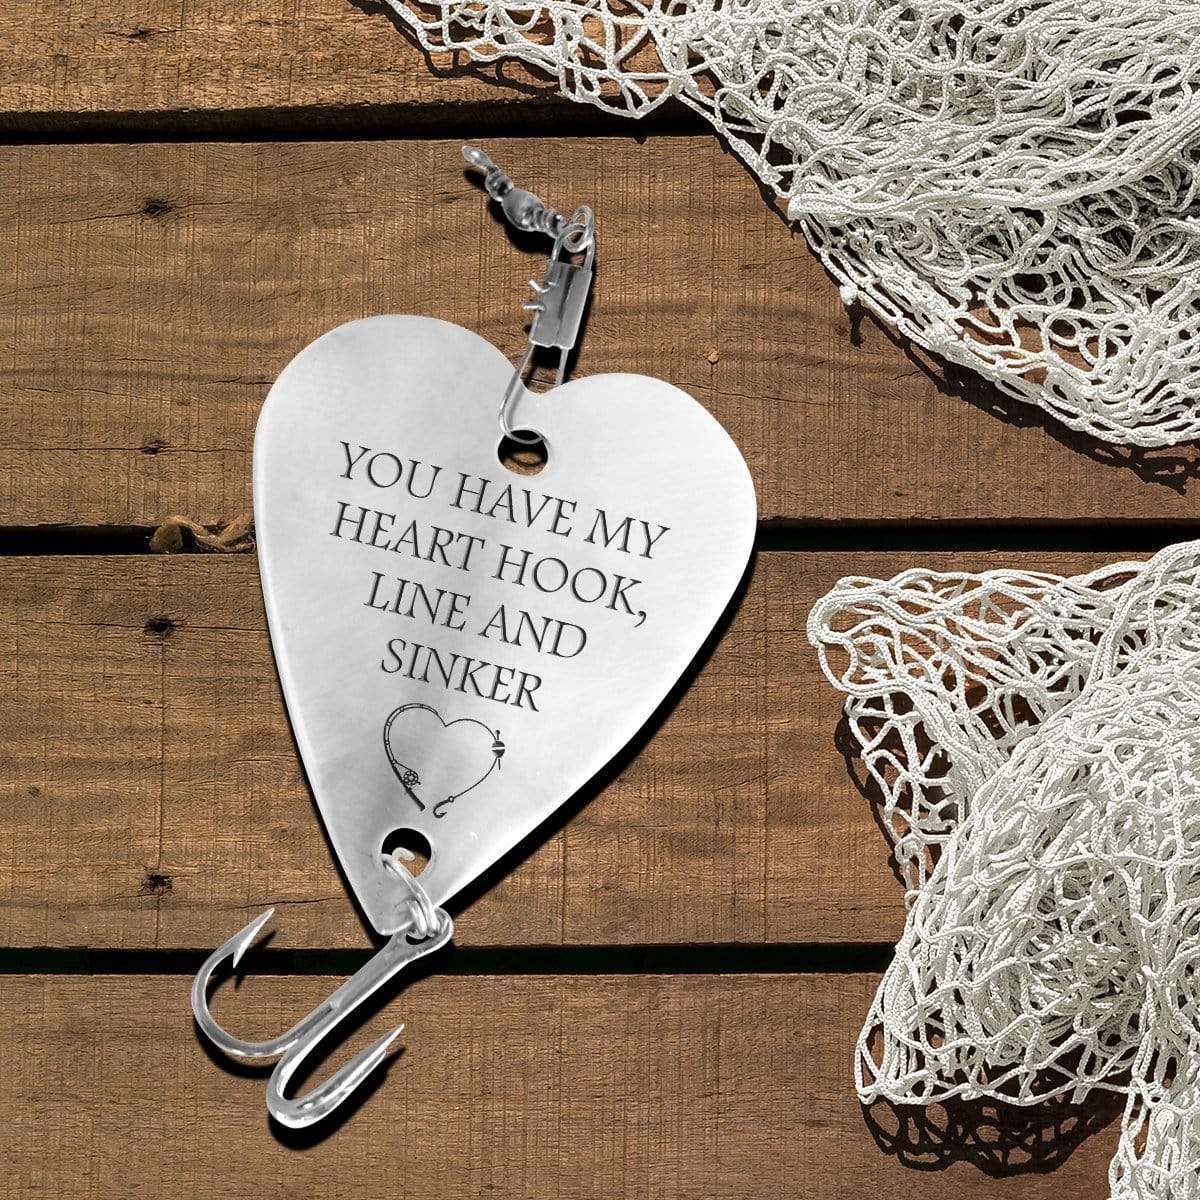 Fishing Lure Boyfriend Gifts You Have My Heart Hook Line and Sinker Husband  Christmas Valentines Gift Fisherman for Him Birthday Present (You Have My